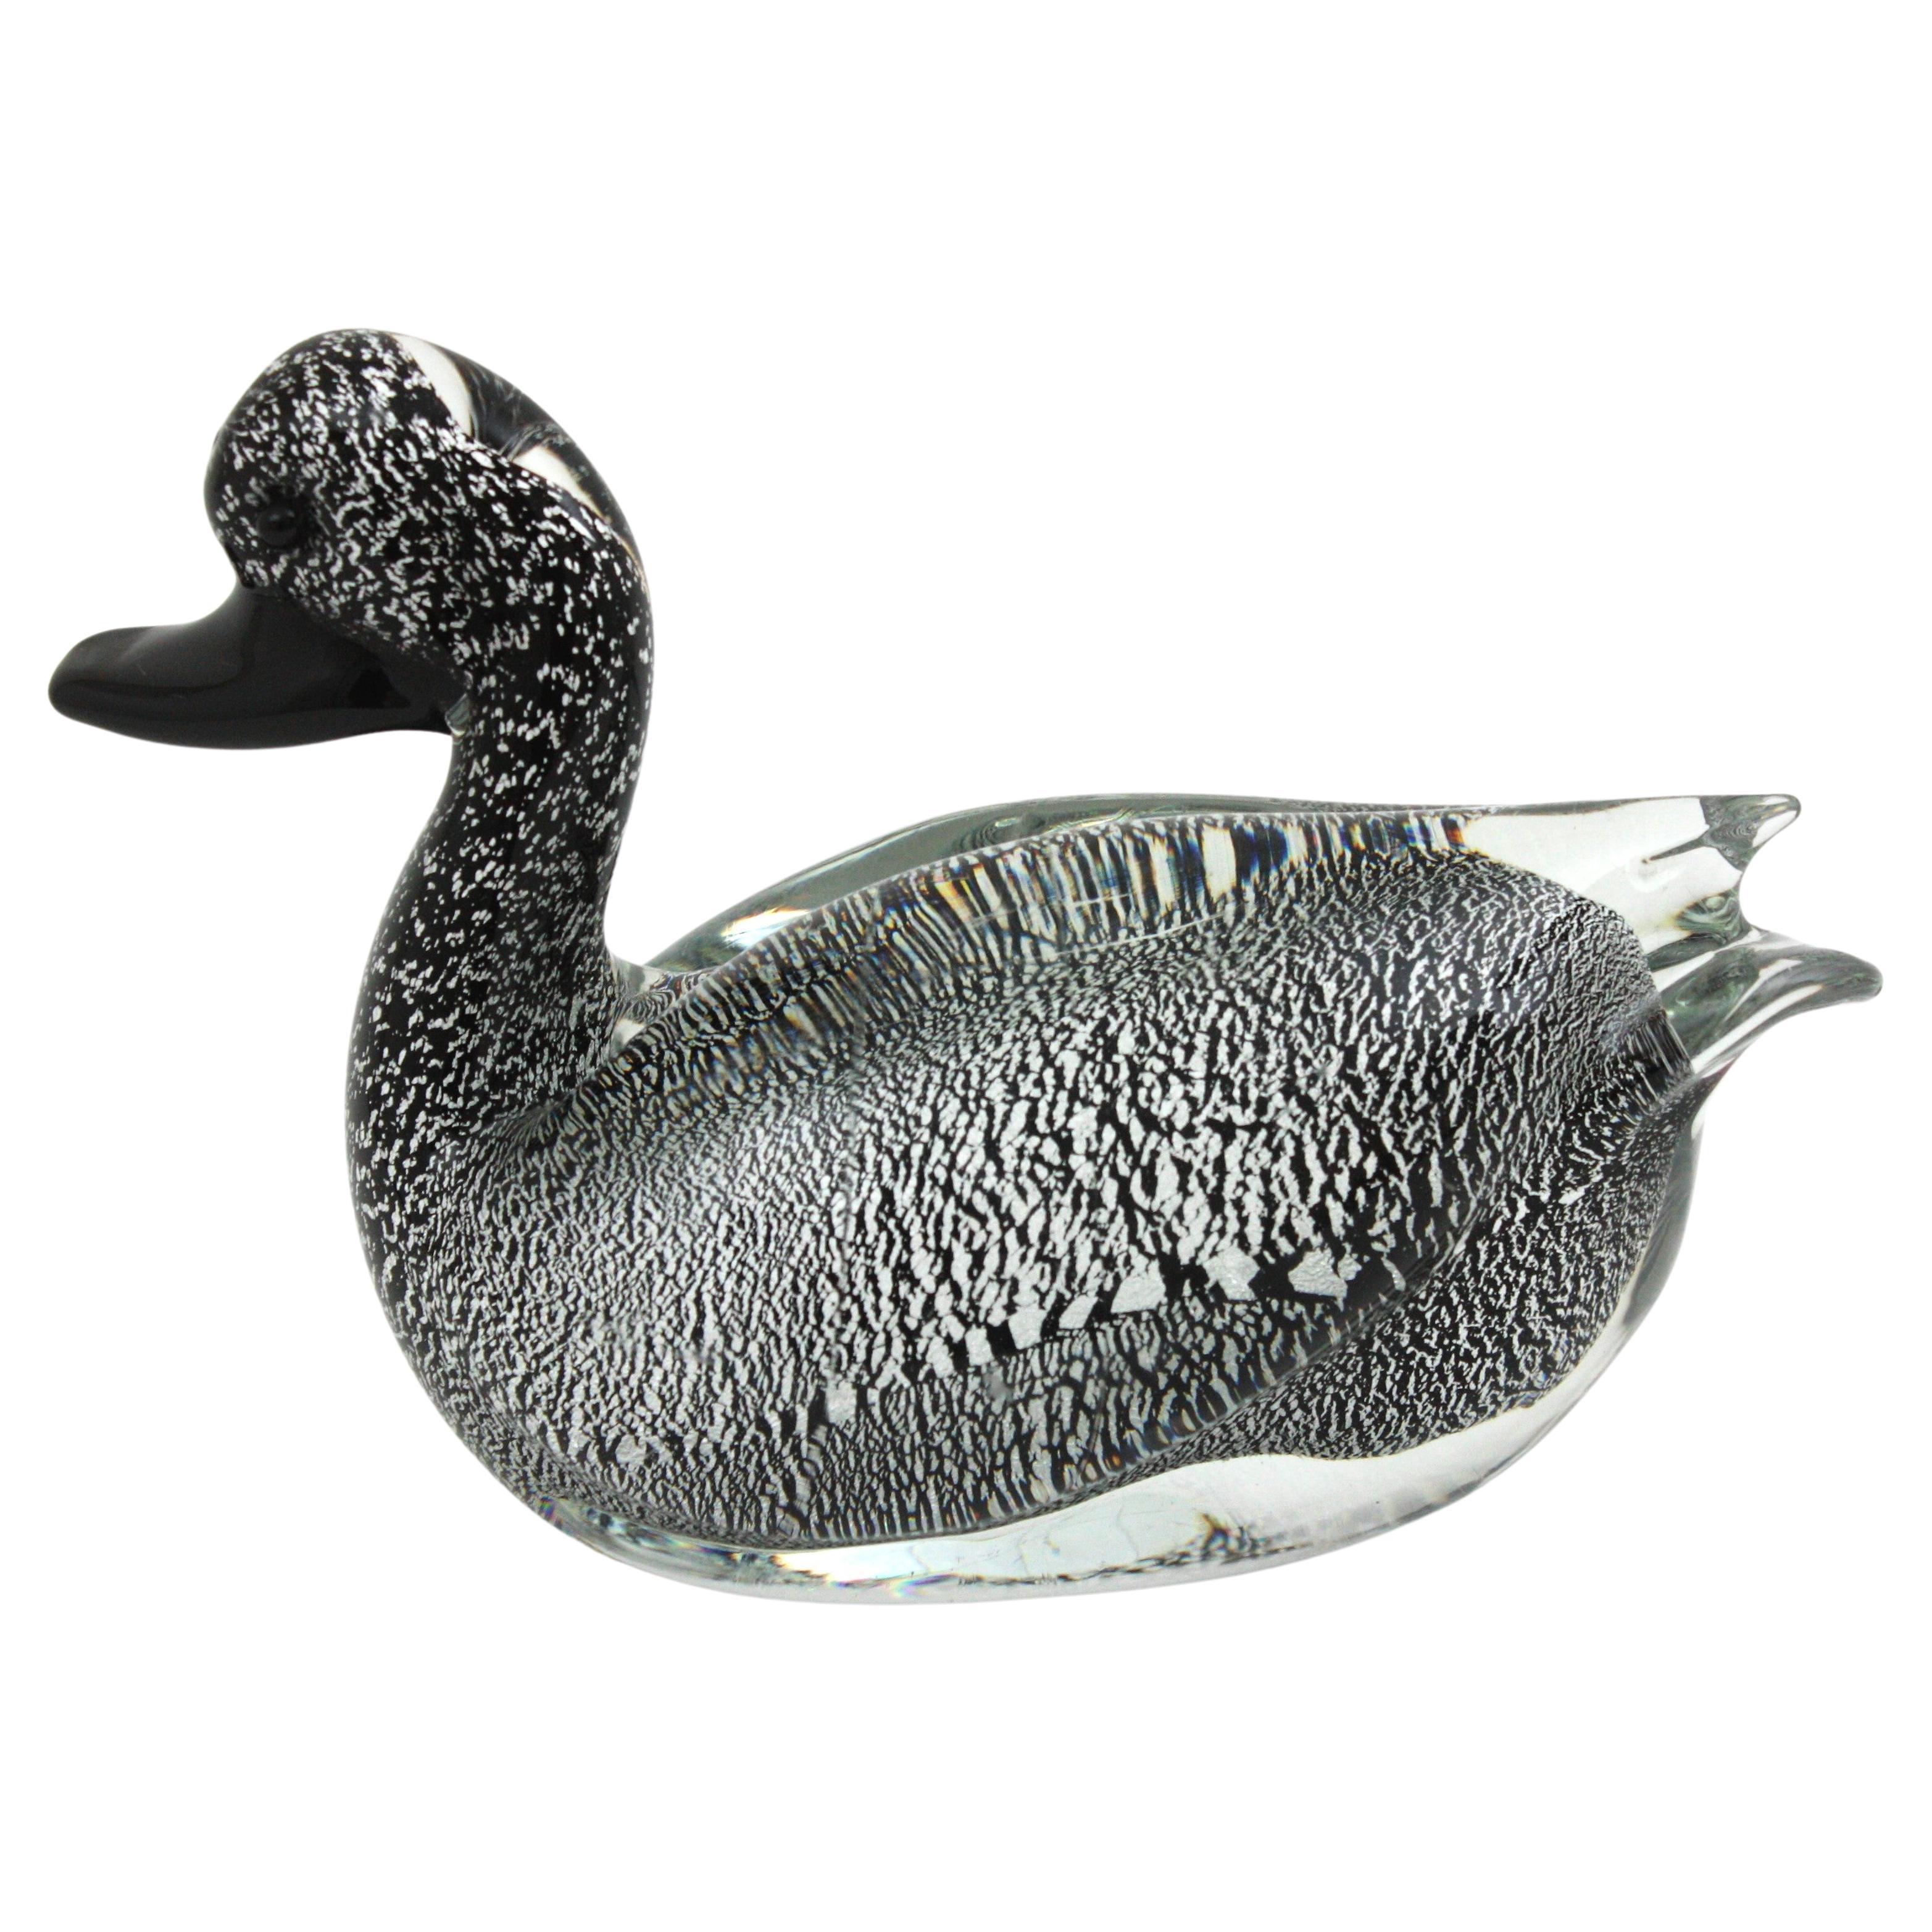  Murano Black Clear Duck Sculpture Art Glass Paperweight with Silver Flecks For Sale 2